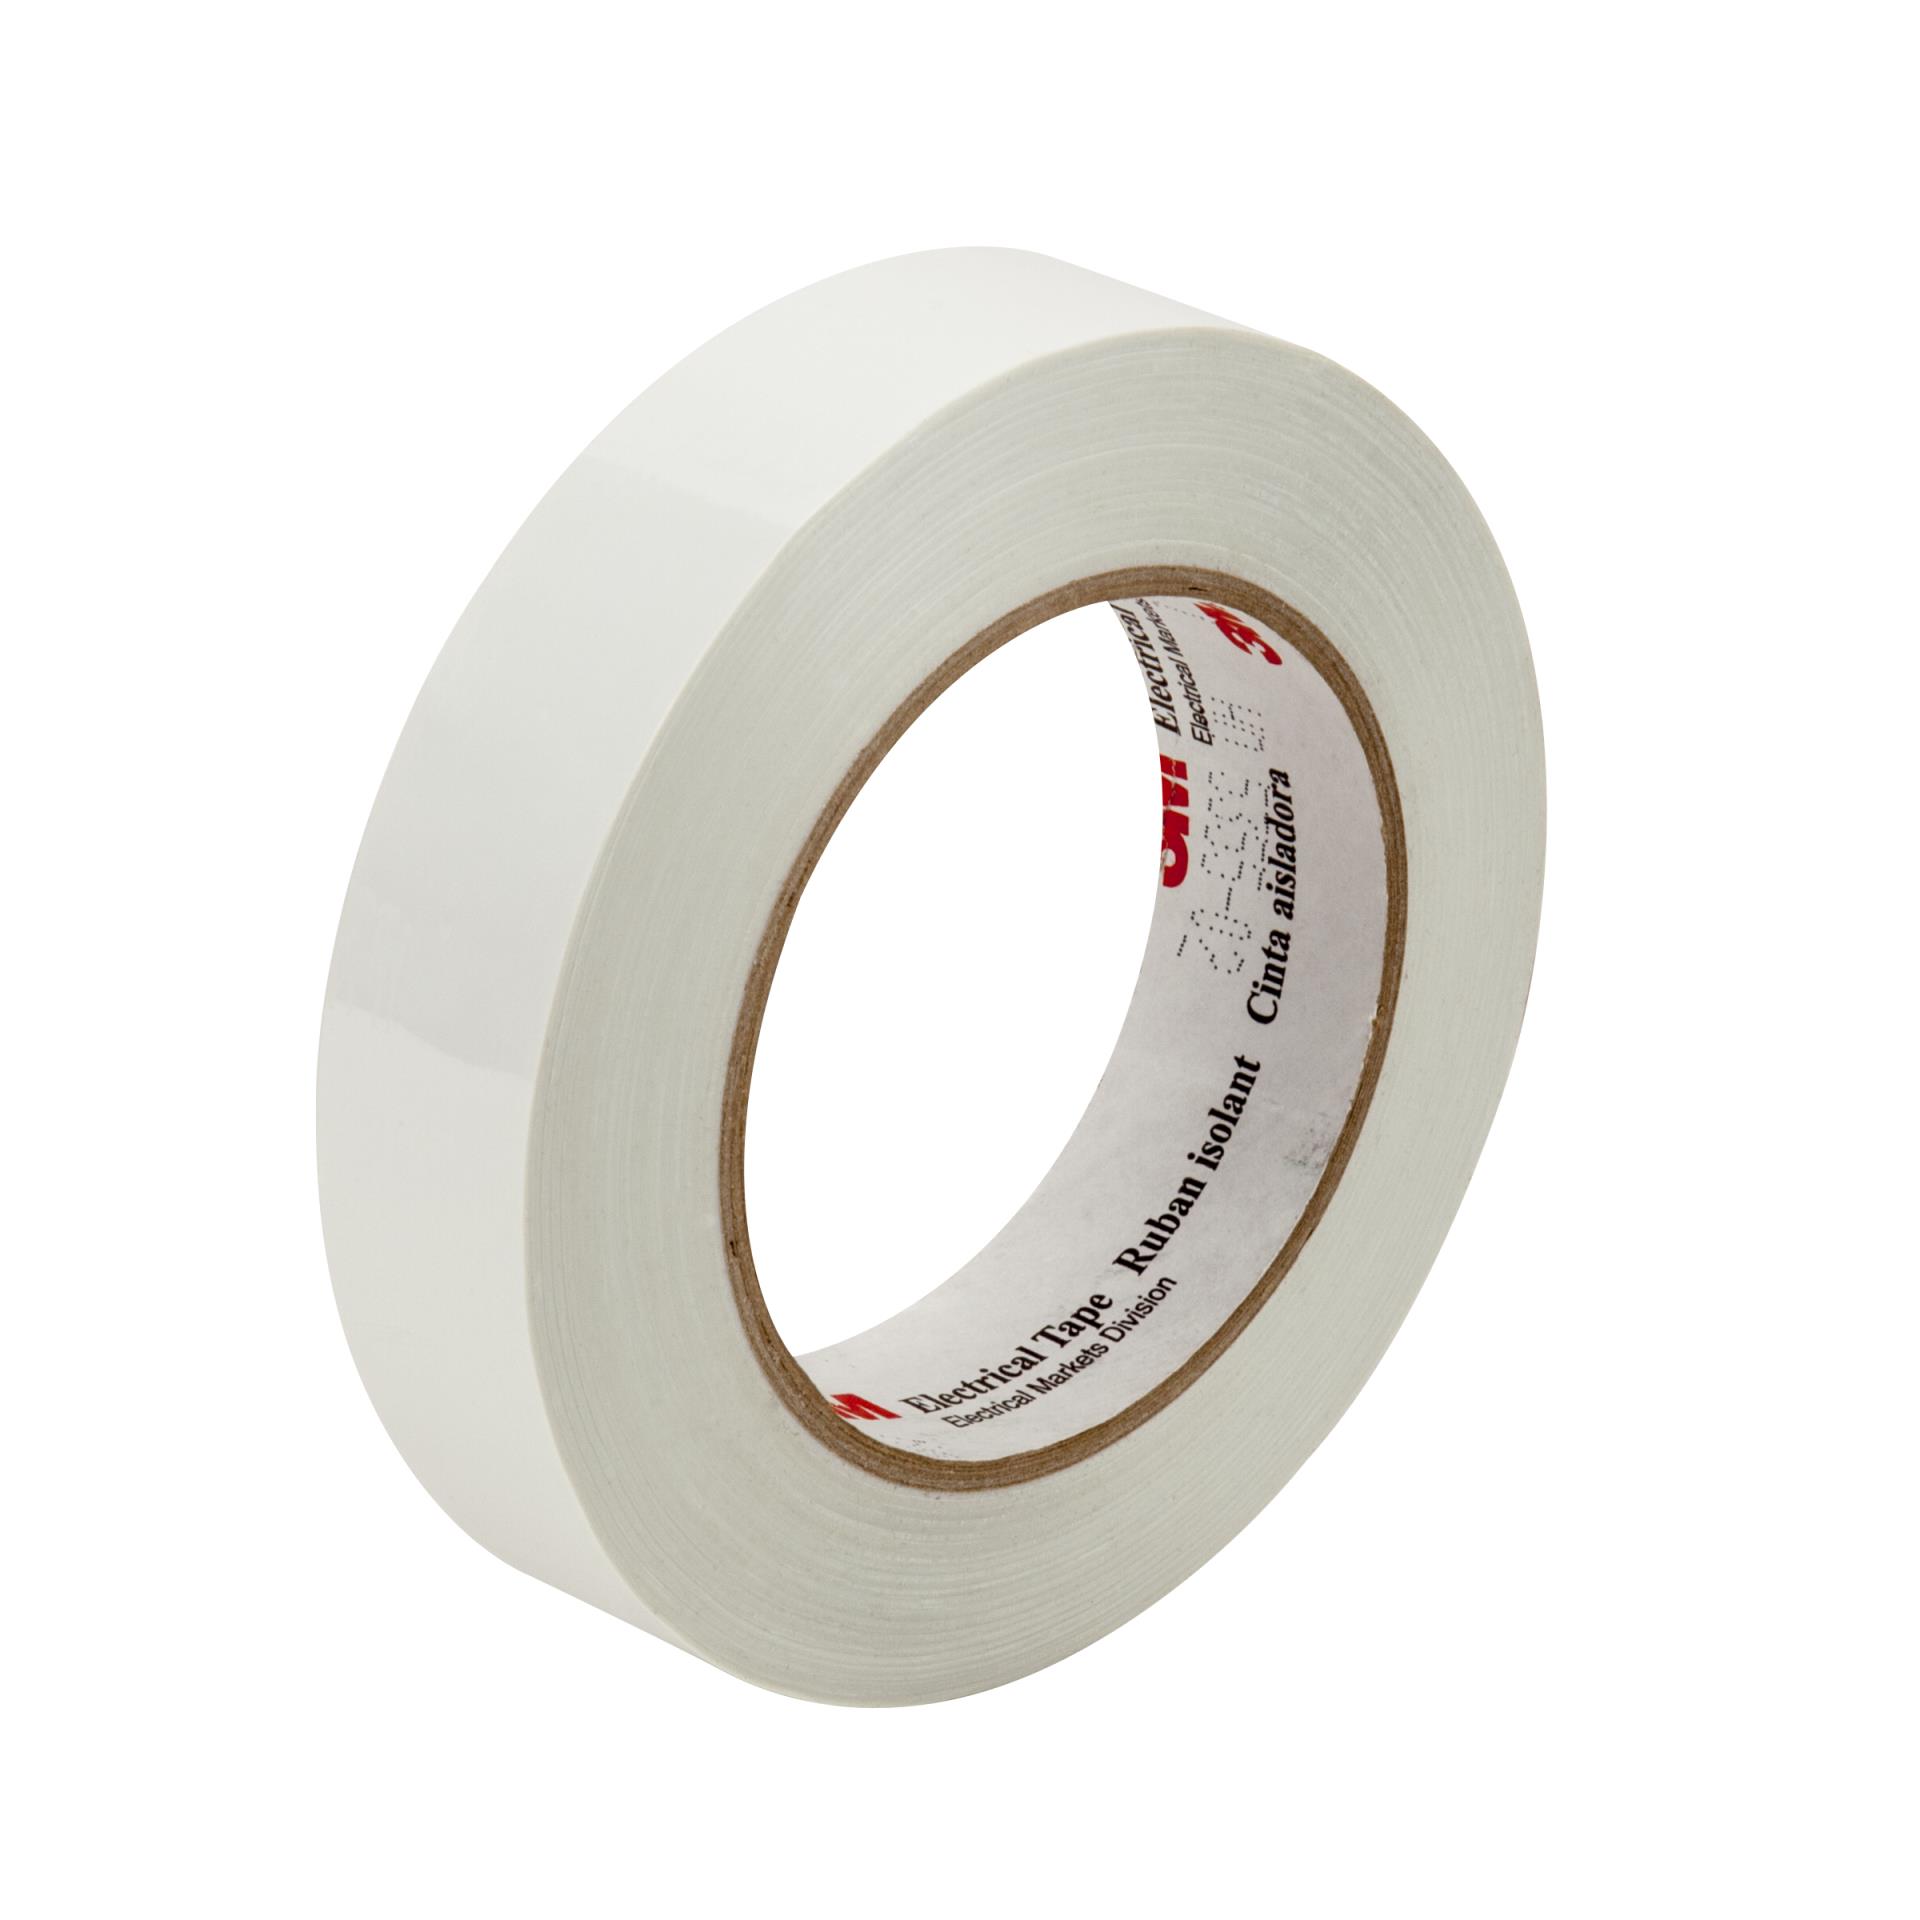 00076308623494 3M™ Epoxy Film Electrical Tape 1, 25 mm x 66 m,  Rolls/Case Aircraft products epoxy-tapes 9391797